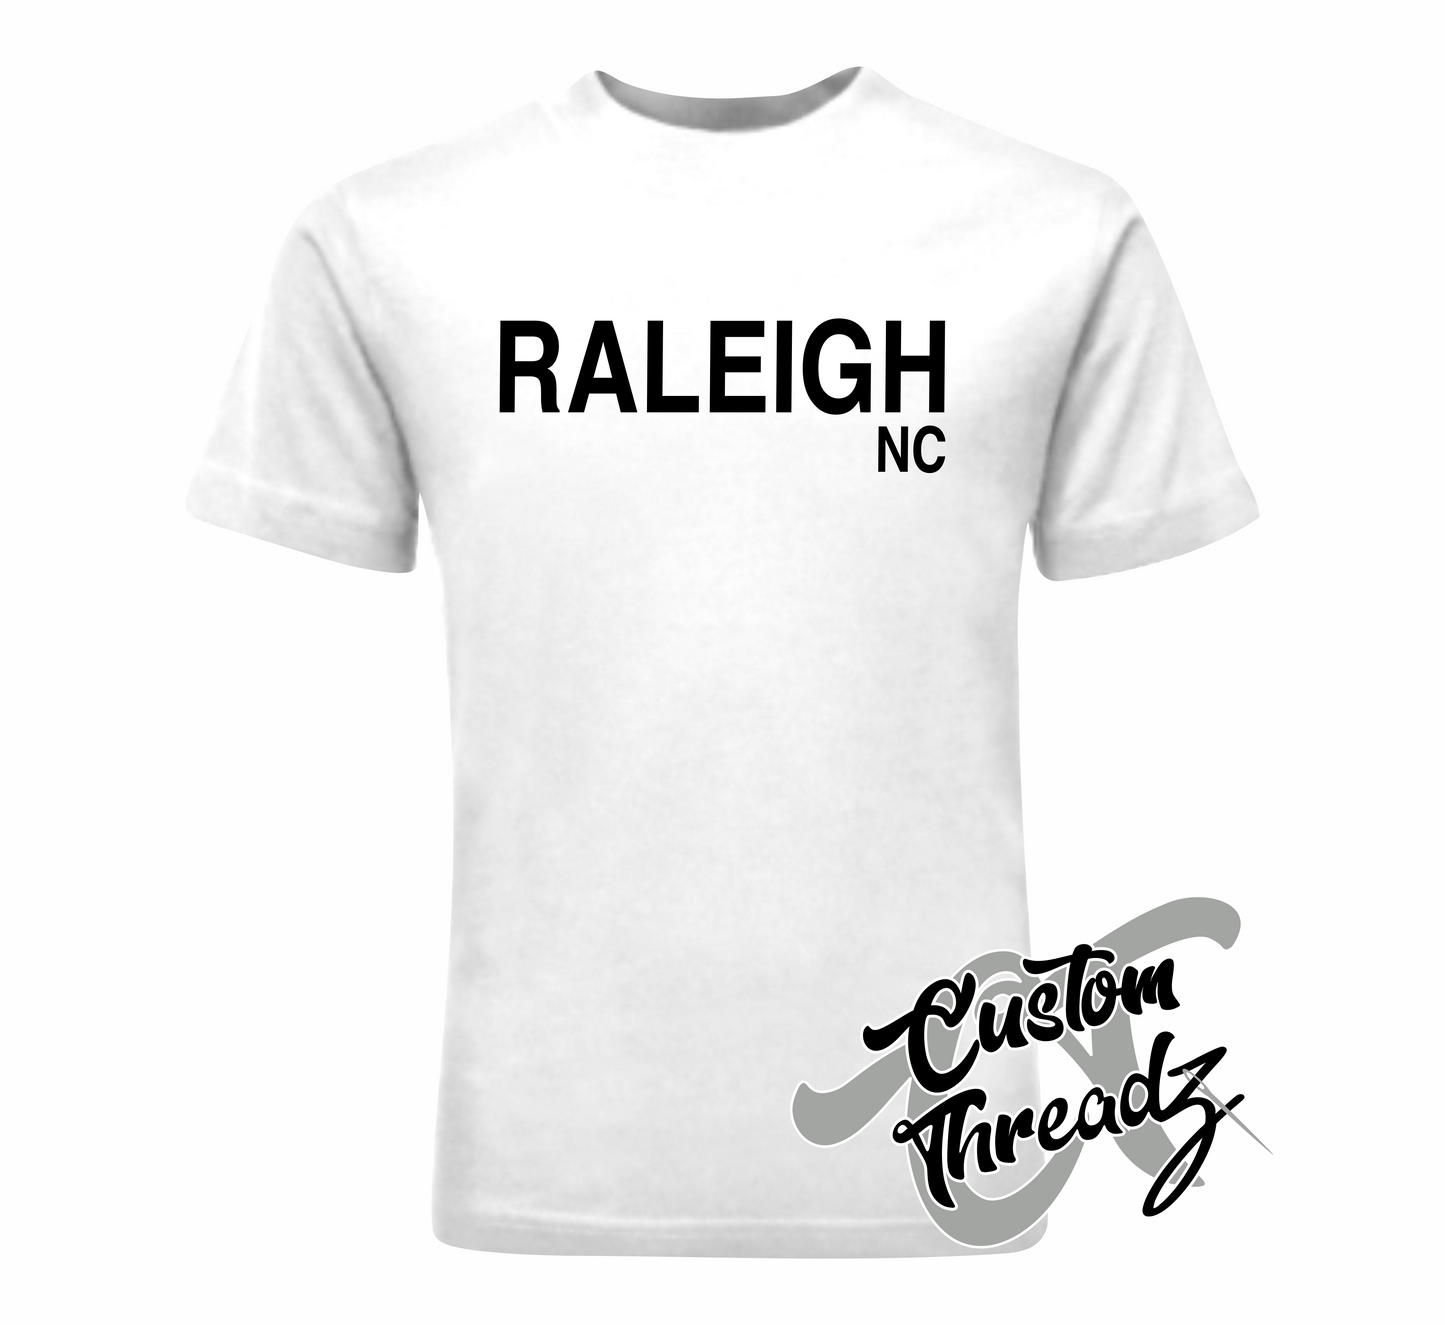 white tee with raleigh nc DTG printed design